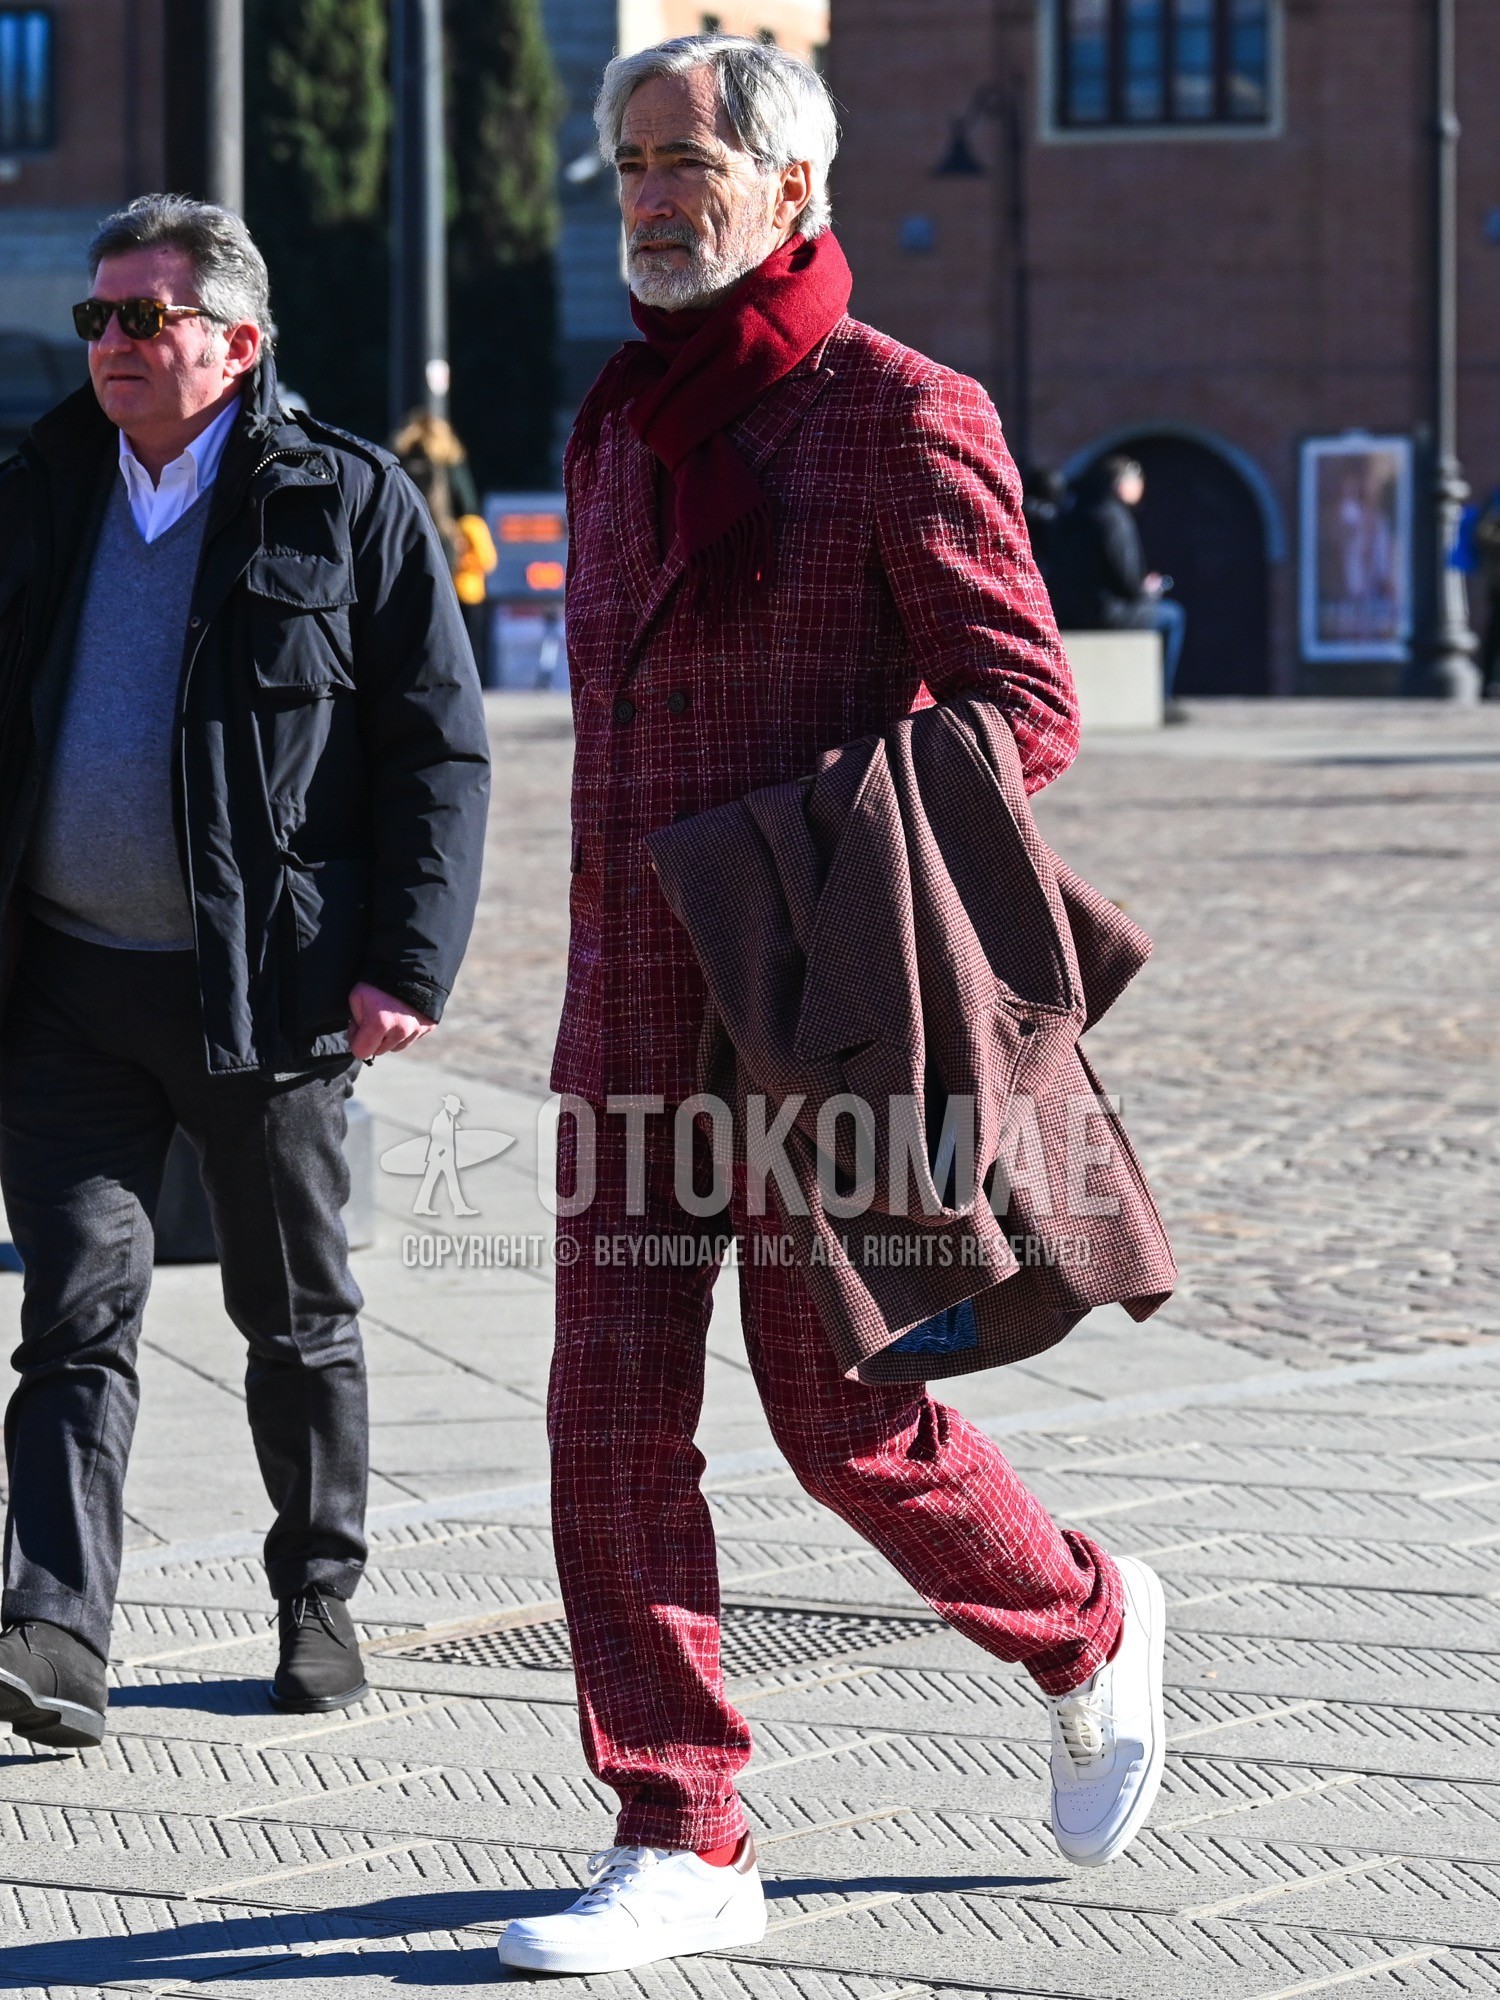 Men's autumn winter outfit with red plain scarf, red check chester coat, red plain socks, white low-cut sneakers, red check suit.